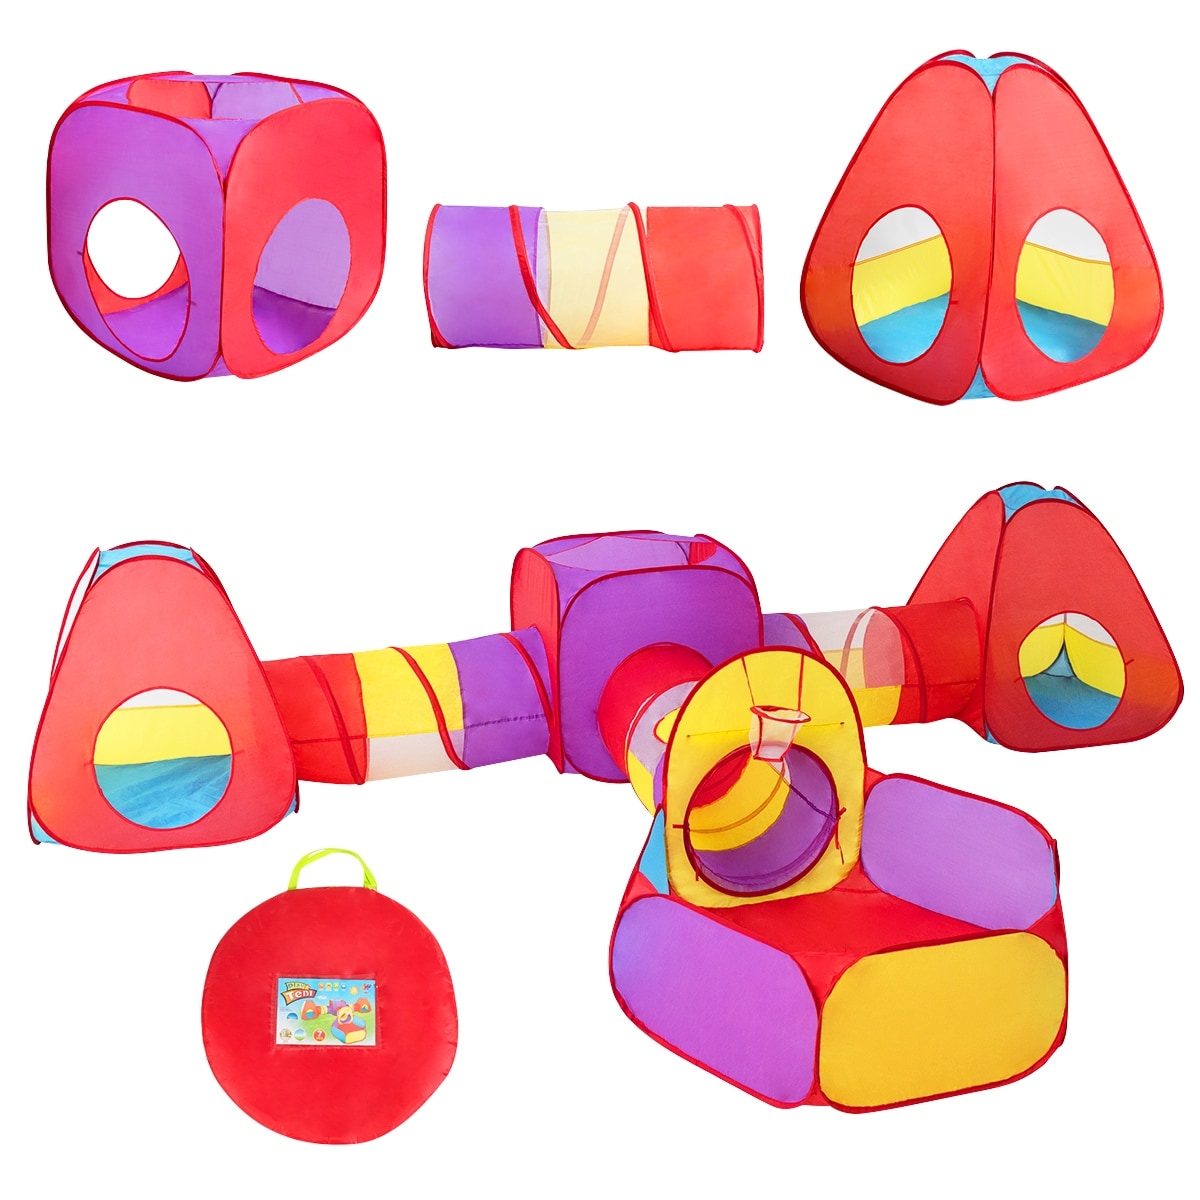 https://ak1.ostkcdn.com/images/products/is/images/direct/fbedbab0df238e3e8a2ee2b84a38aeead8a5658e/Costway-7pc-Kids-Ball-Pit-Play-Tents-%26-Tunnels-Pop-Up-Baby-Toy-Gifts.jpg